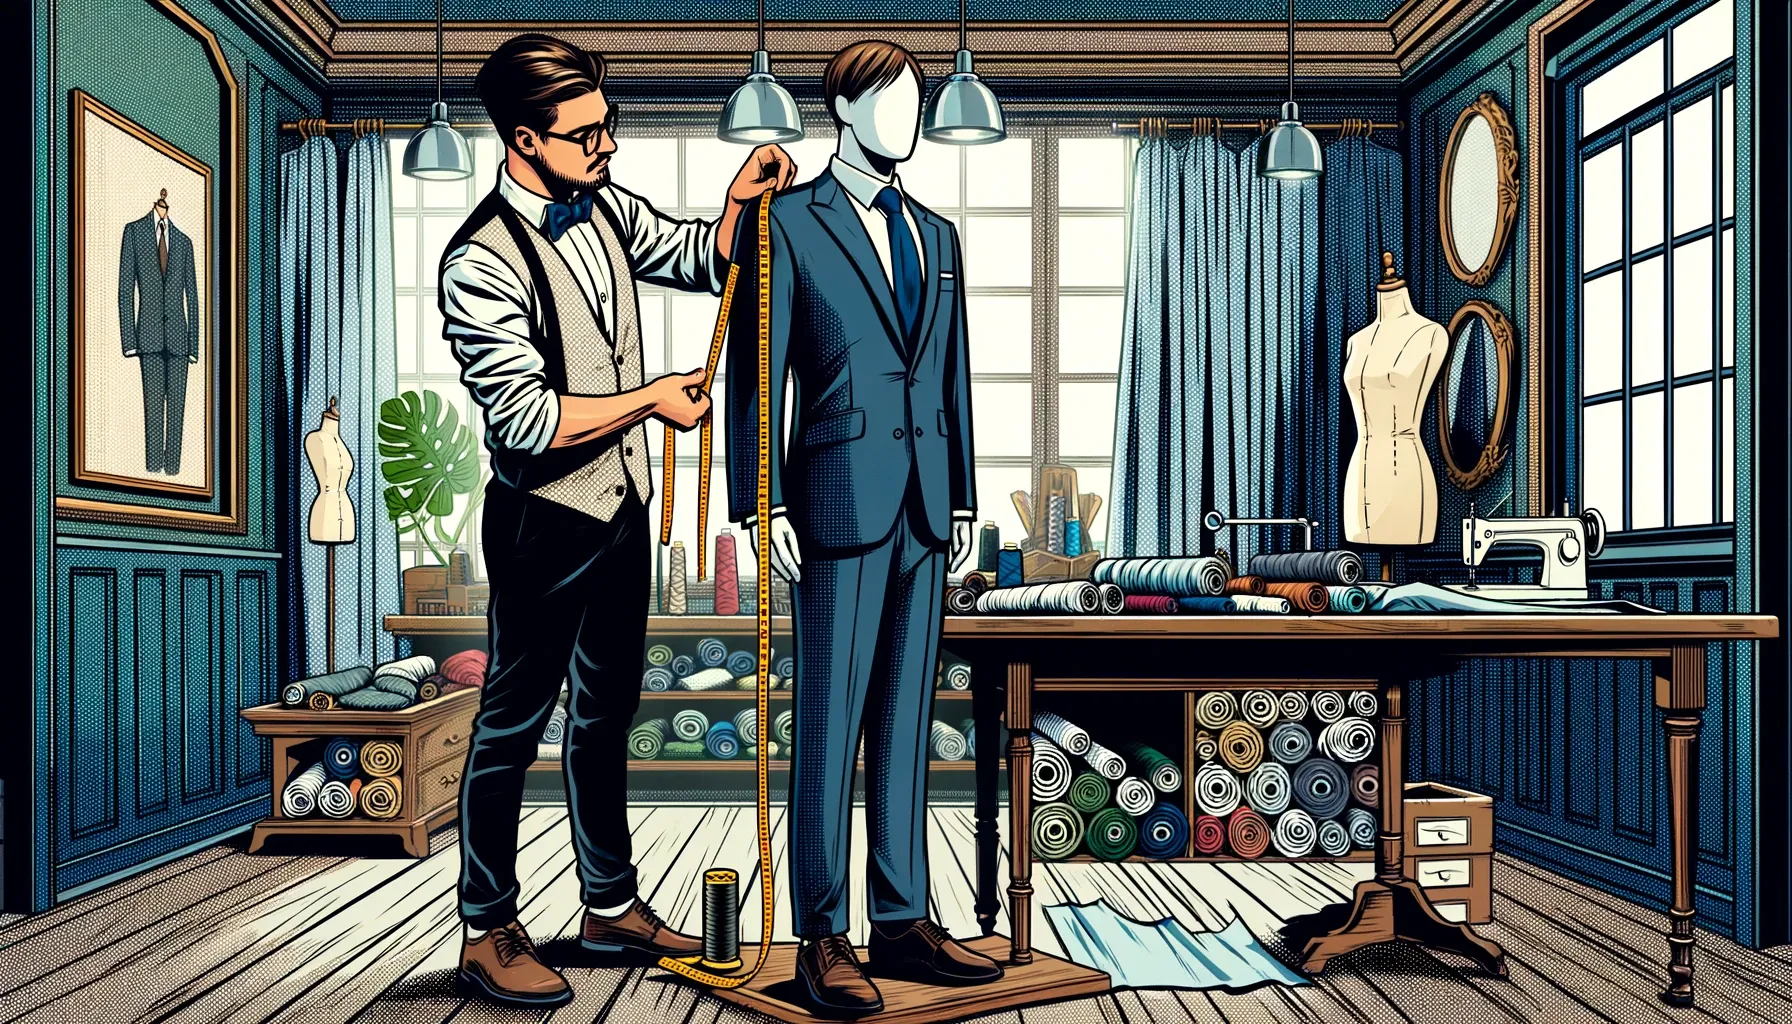 A tailor measuring a mannequin dressed in a suit in a vintage tailoring workshop, surrounded by rolls of fabric and sewing equipment, depicted in a detailed comic book style.